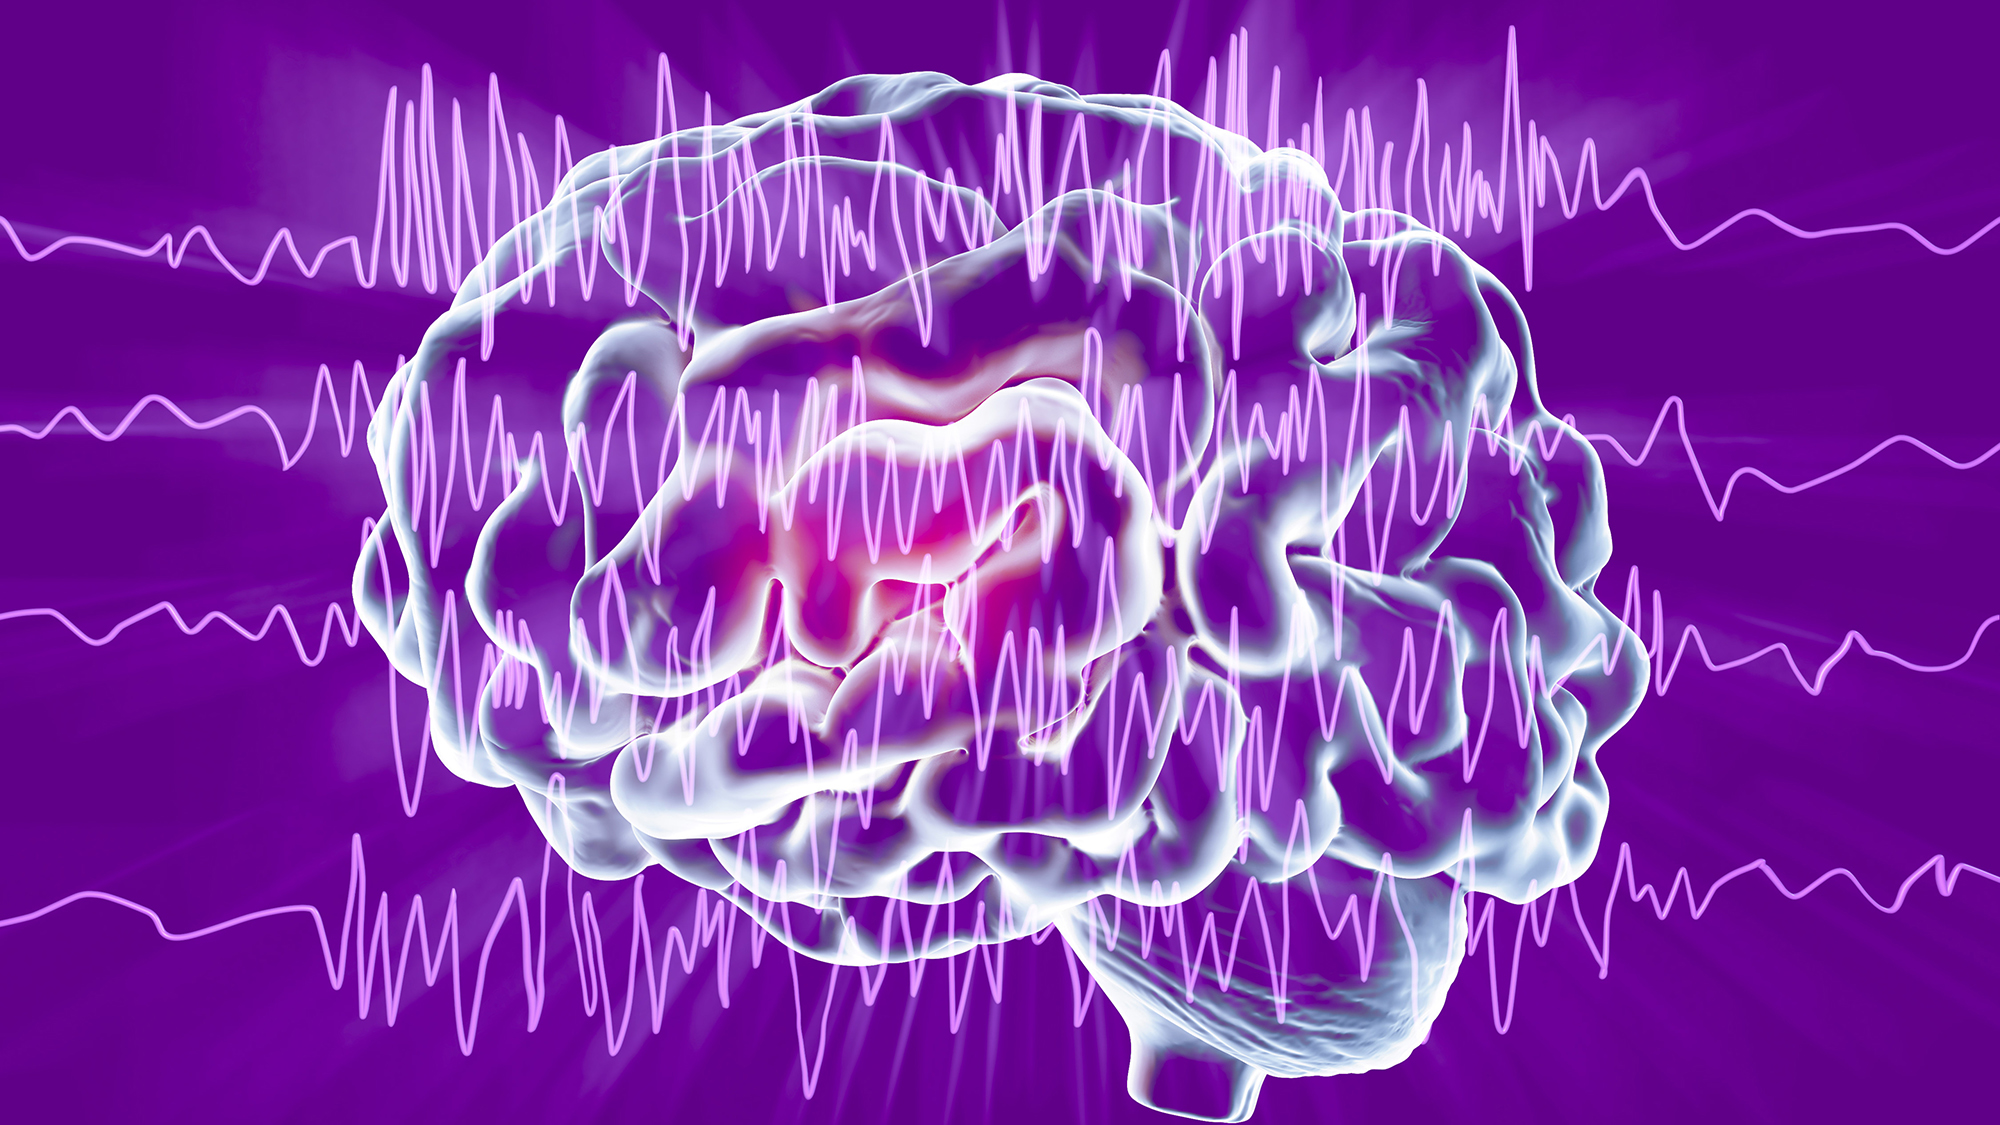 Brain and brain waves in epilepsy, computer illustration. This EEG (electroencephalogram) illustration shows generalized epilepsy, affecting the whole brain cortex: all the EEG traces show chaotic brain waves. Epilepsy can take many forms, and have different effects. This could illustrate both benign epilepsy (inherited childhood form that normally improves with age), and myoclonic epilepsy (form that causes muscle contractions). An EEG measures electrical activity in the brain using electrodes attached to the scalp.